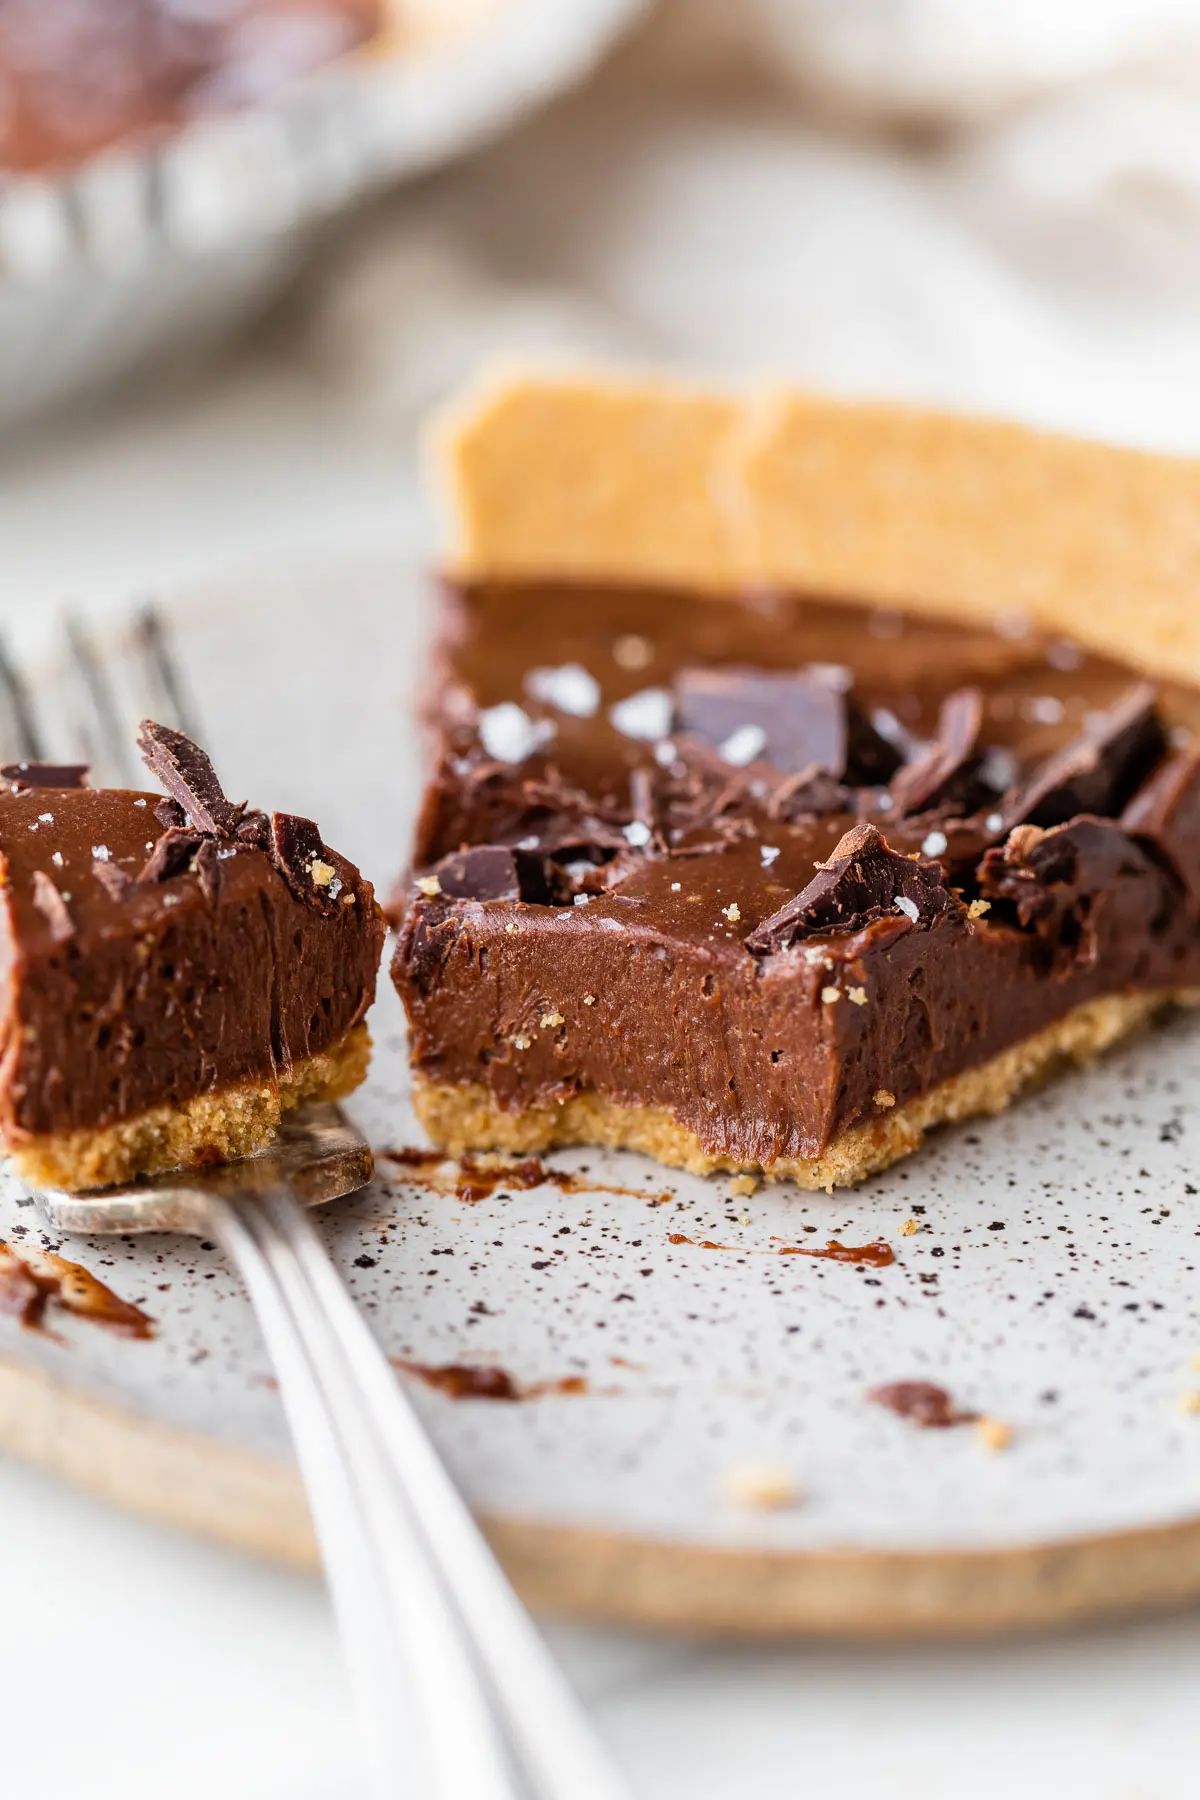 a slice of chocolate pie on a plate